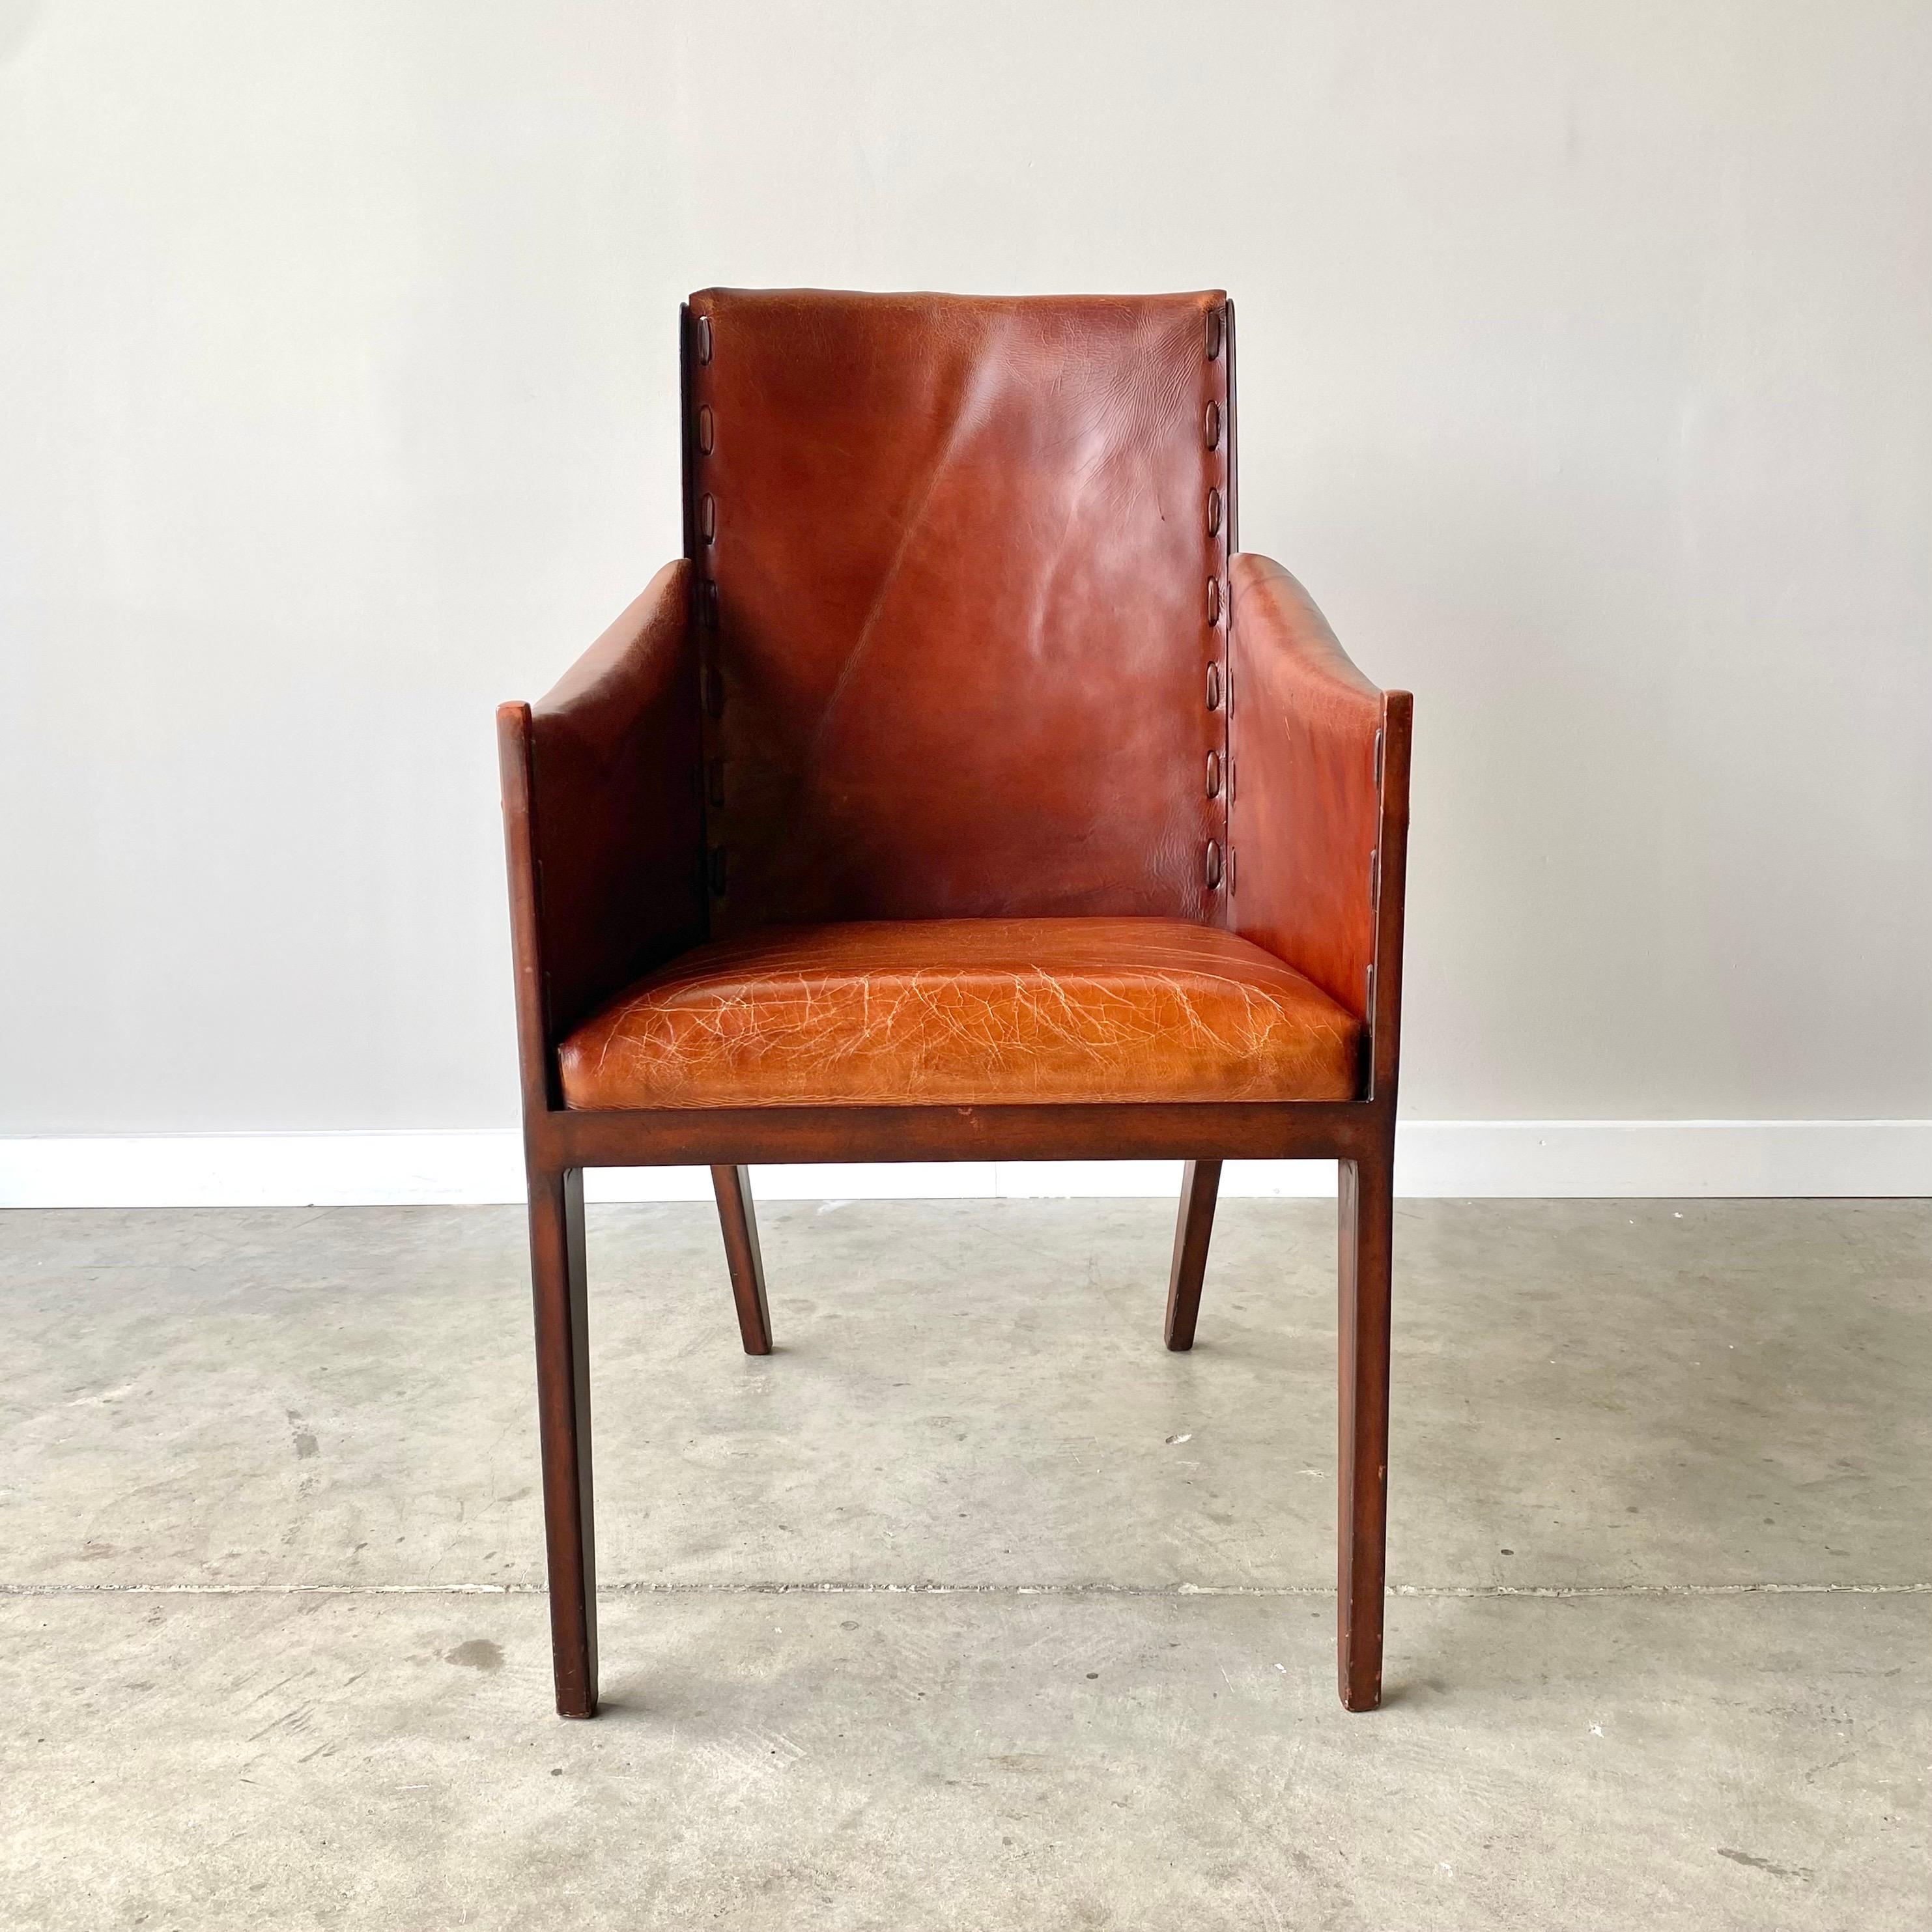 A striking pair of leather and steel armchairs.  A contemporary pair in the style of Jean-Michel Frank.  Tied leather seats over painted metal frame, stunning and comfortable.

